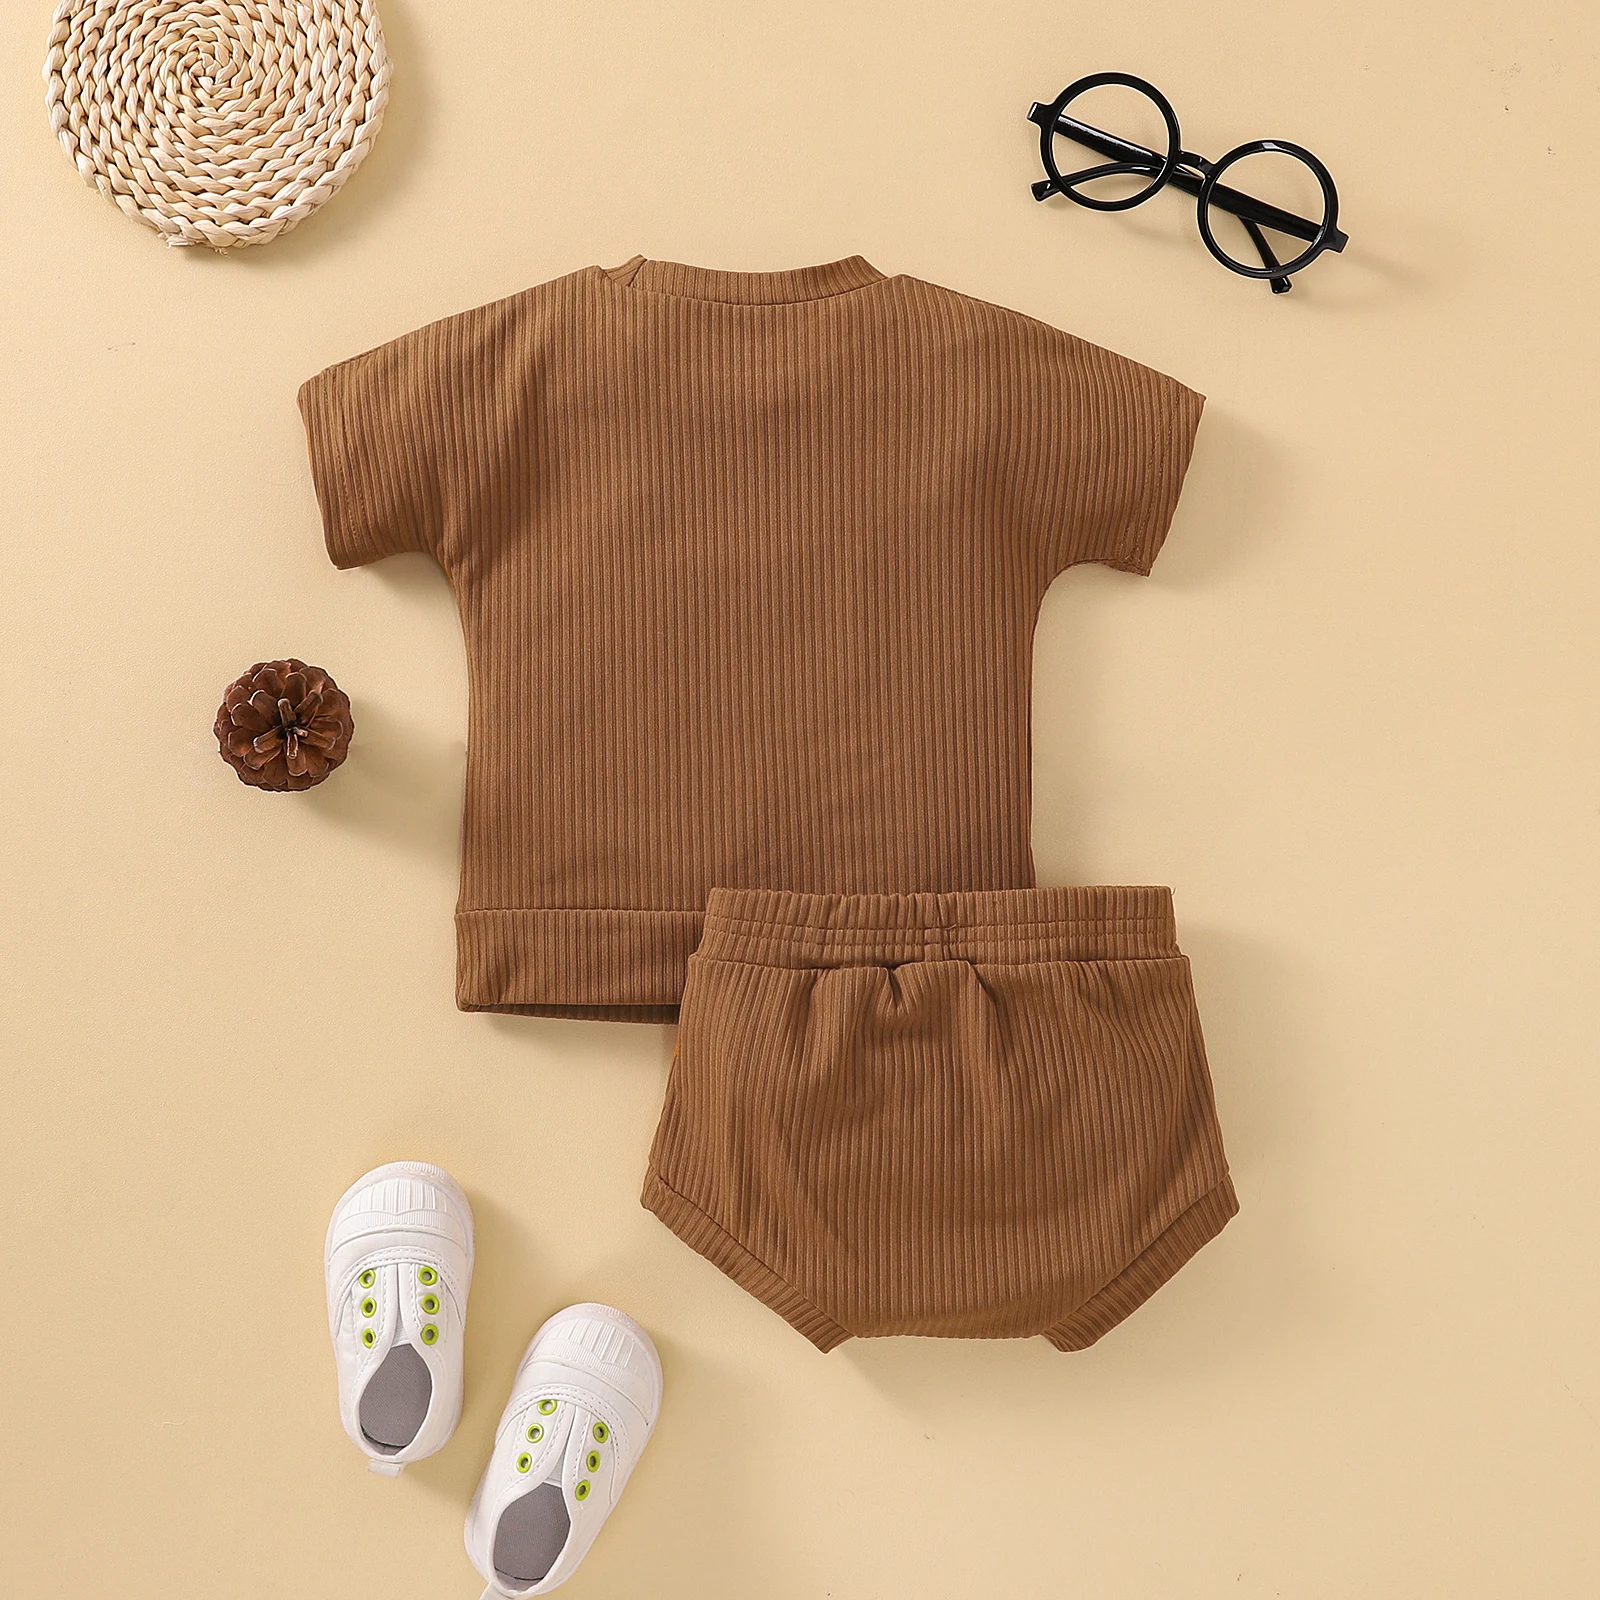 baby clothing set line 2022 3-24M Infant Baby Casual Clothing BABE Short Sleeve Letter Printed Boys Girls Tops+Bandage Patchwork Shorts Summer Outfits Baby Clothing Set cheap